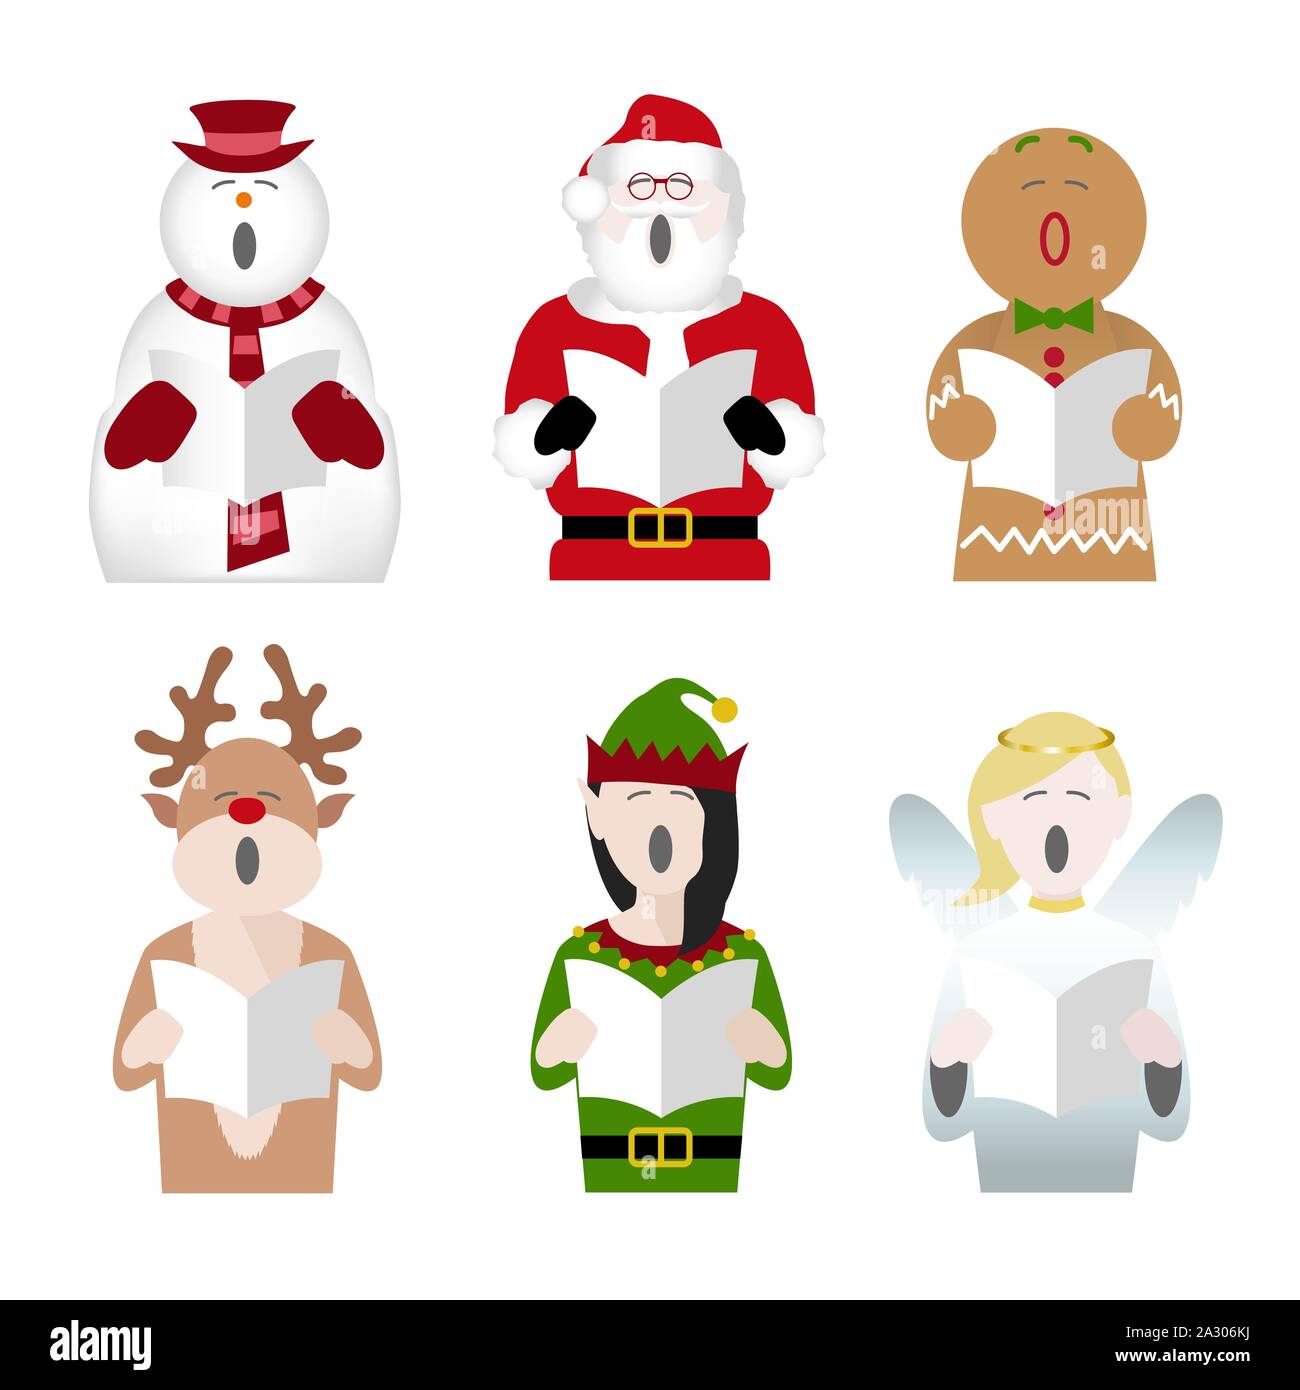 snowman, father Christmas, gingerbread man, reindeer, elf and fairy characters singing Christmas carols Stock Vector